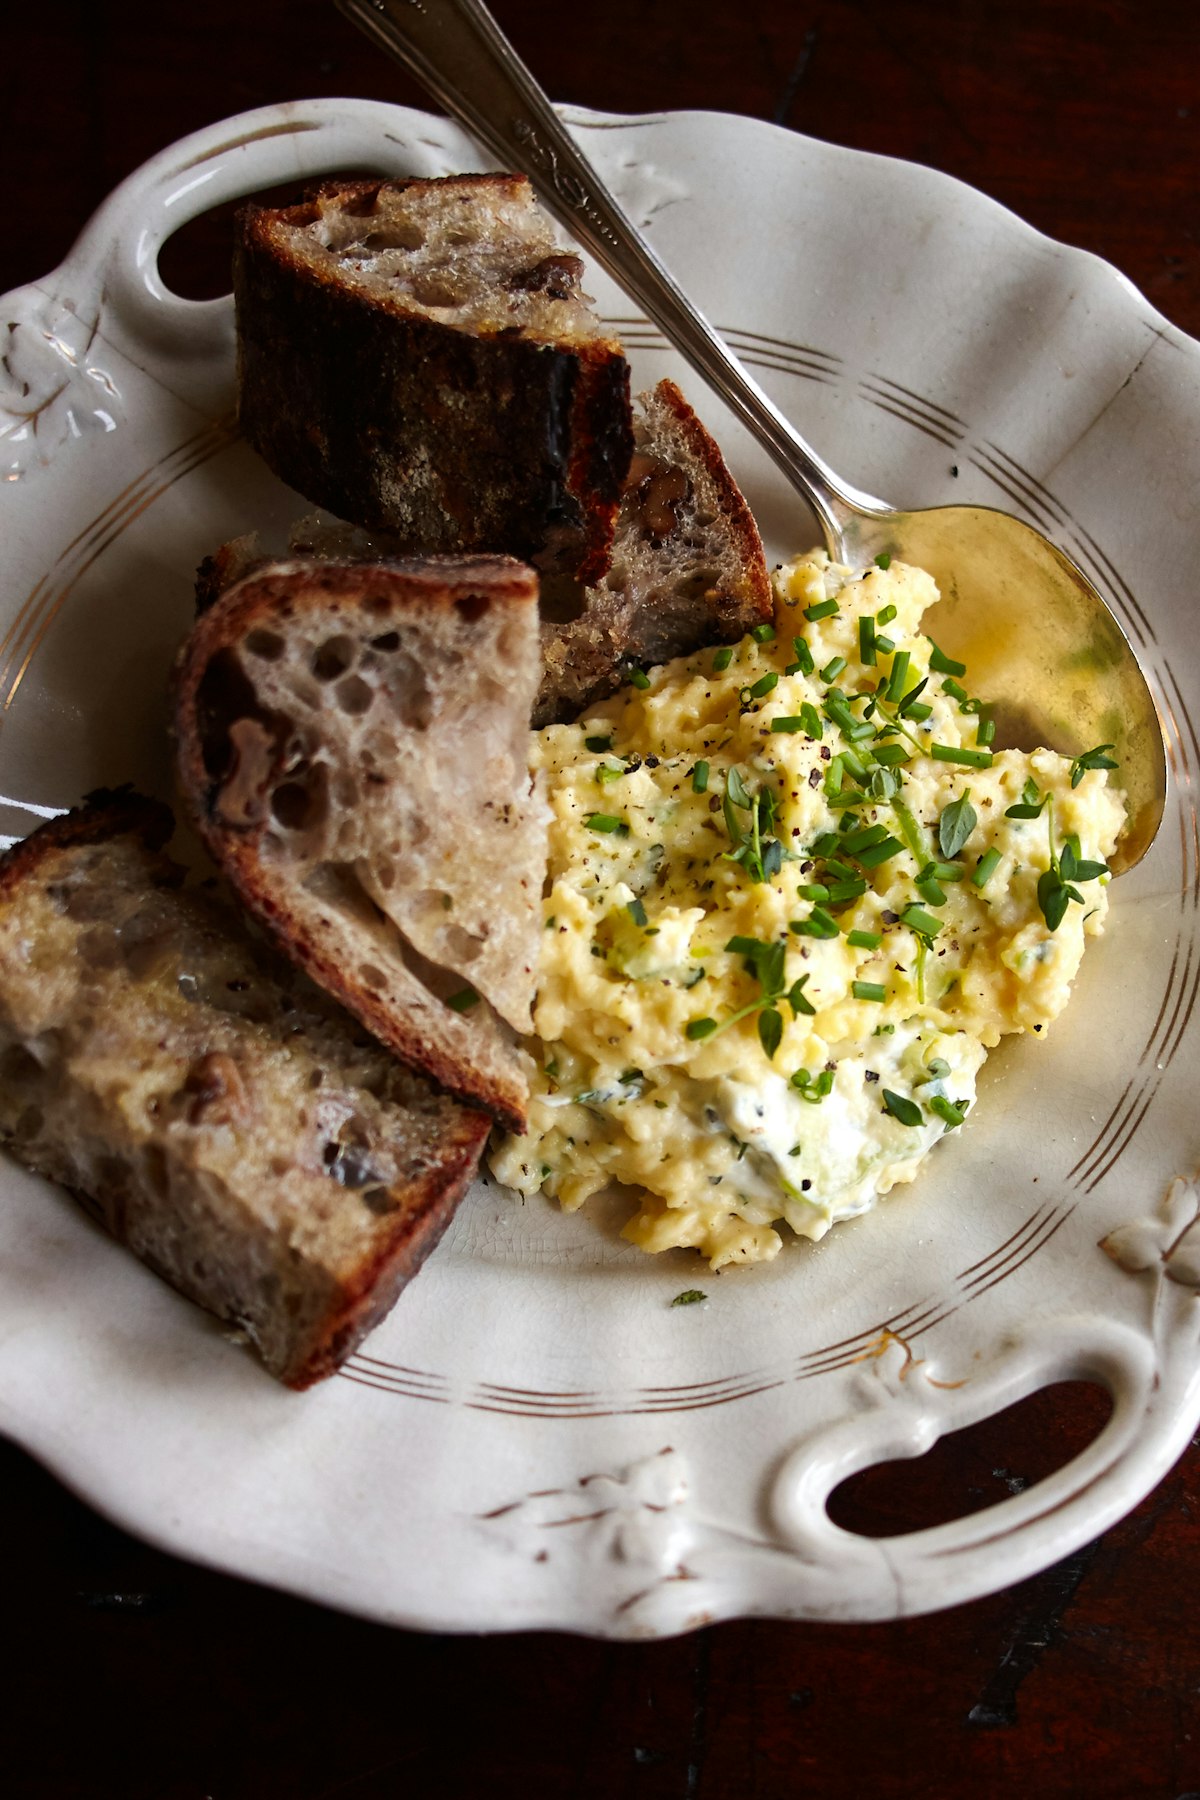 https://images.101cookbooks.com/scrambled-eggs-with-cream-cheese-v.jpg?w=1200&auto=format